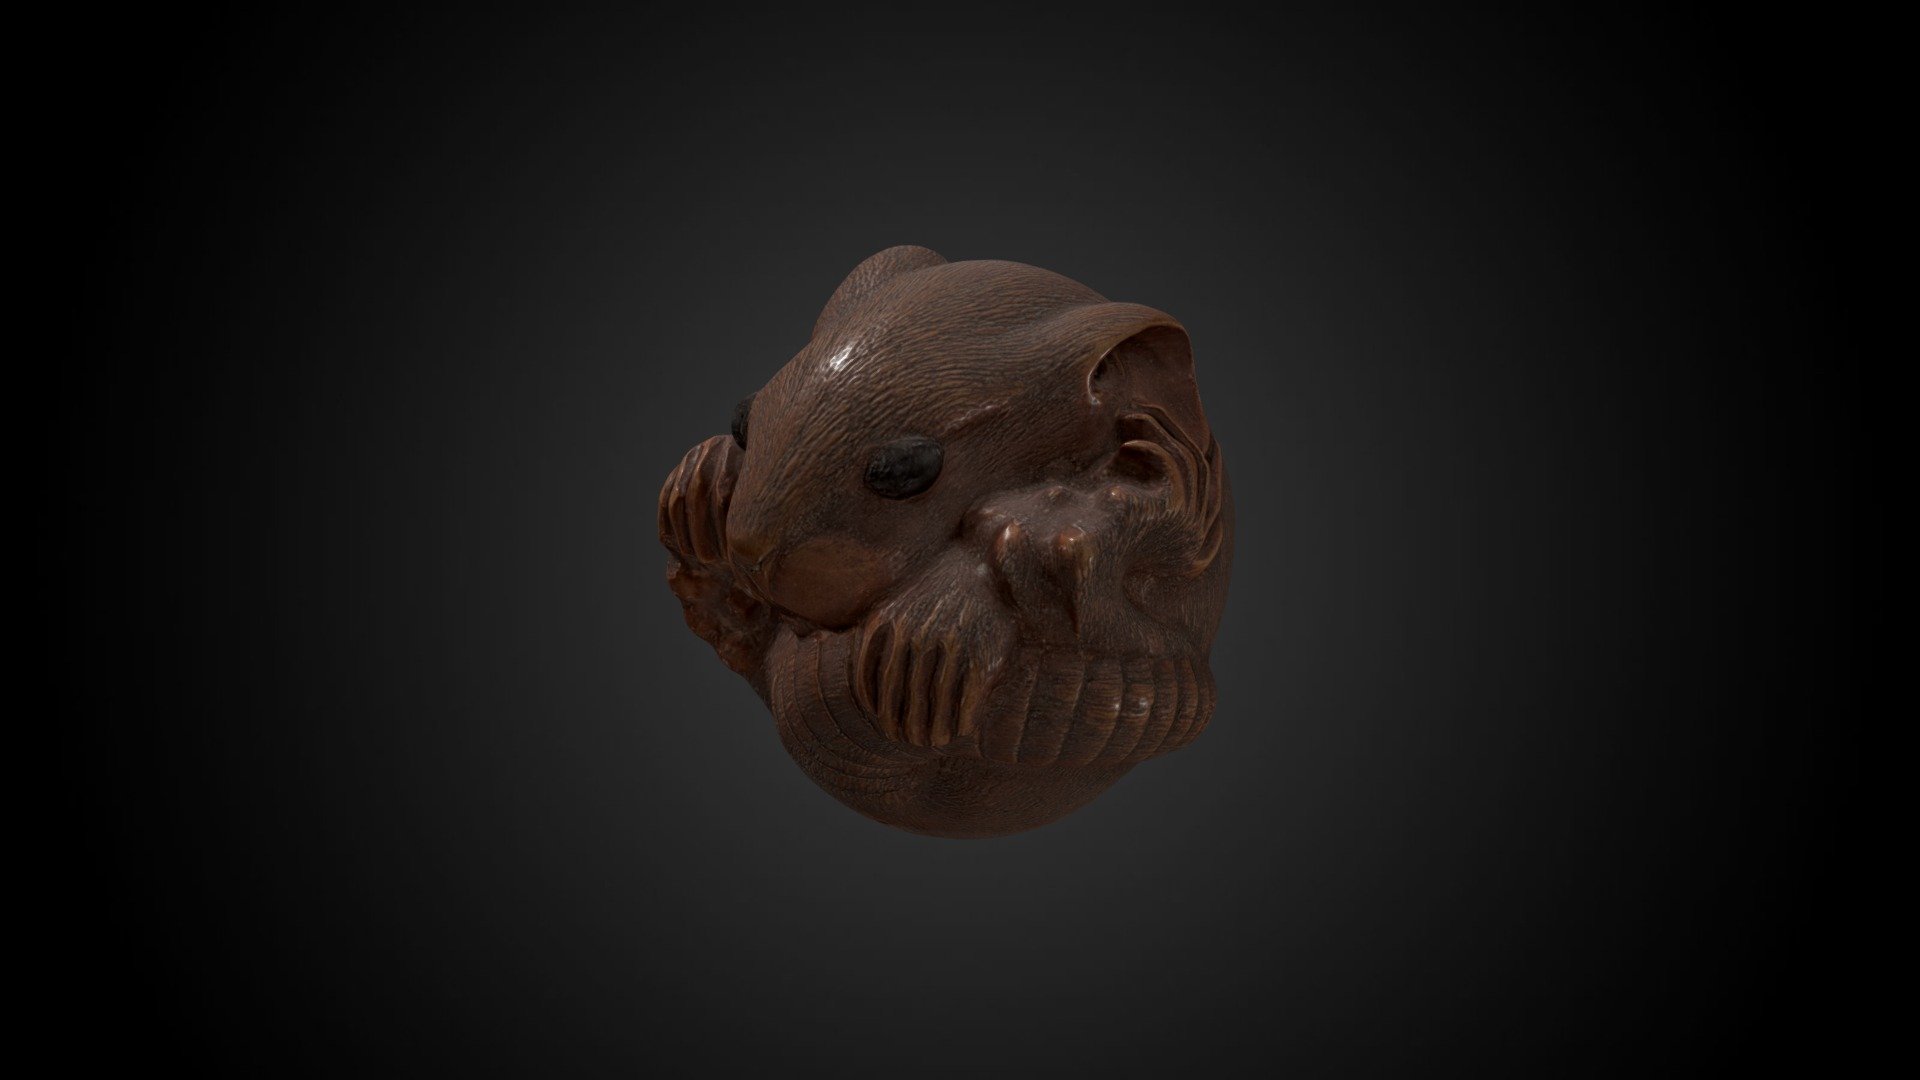 Curled rat netsuke by Suzuki Masanao, made in the second half of the 19th century CE. About 38mm ( 1 1/2 inches) in diameter. (Scaled in VR to about 10cm.)

A little more information about the object here:

https://collections.artsmia.org/art/37576/curled-rat-suzuki-masanao - Netsuke - curled rat - Download Free 3D model by Minneapolis Institute of Art (@artsmia) 3d model